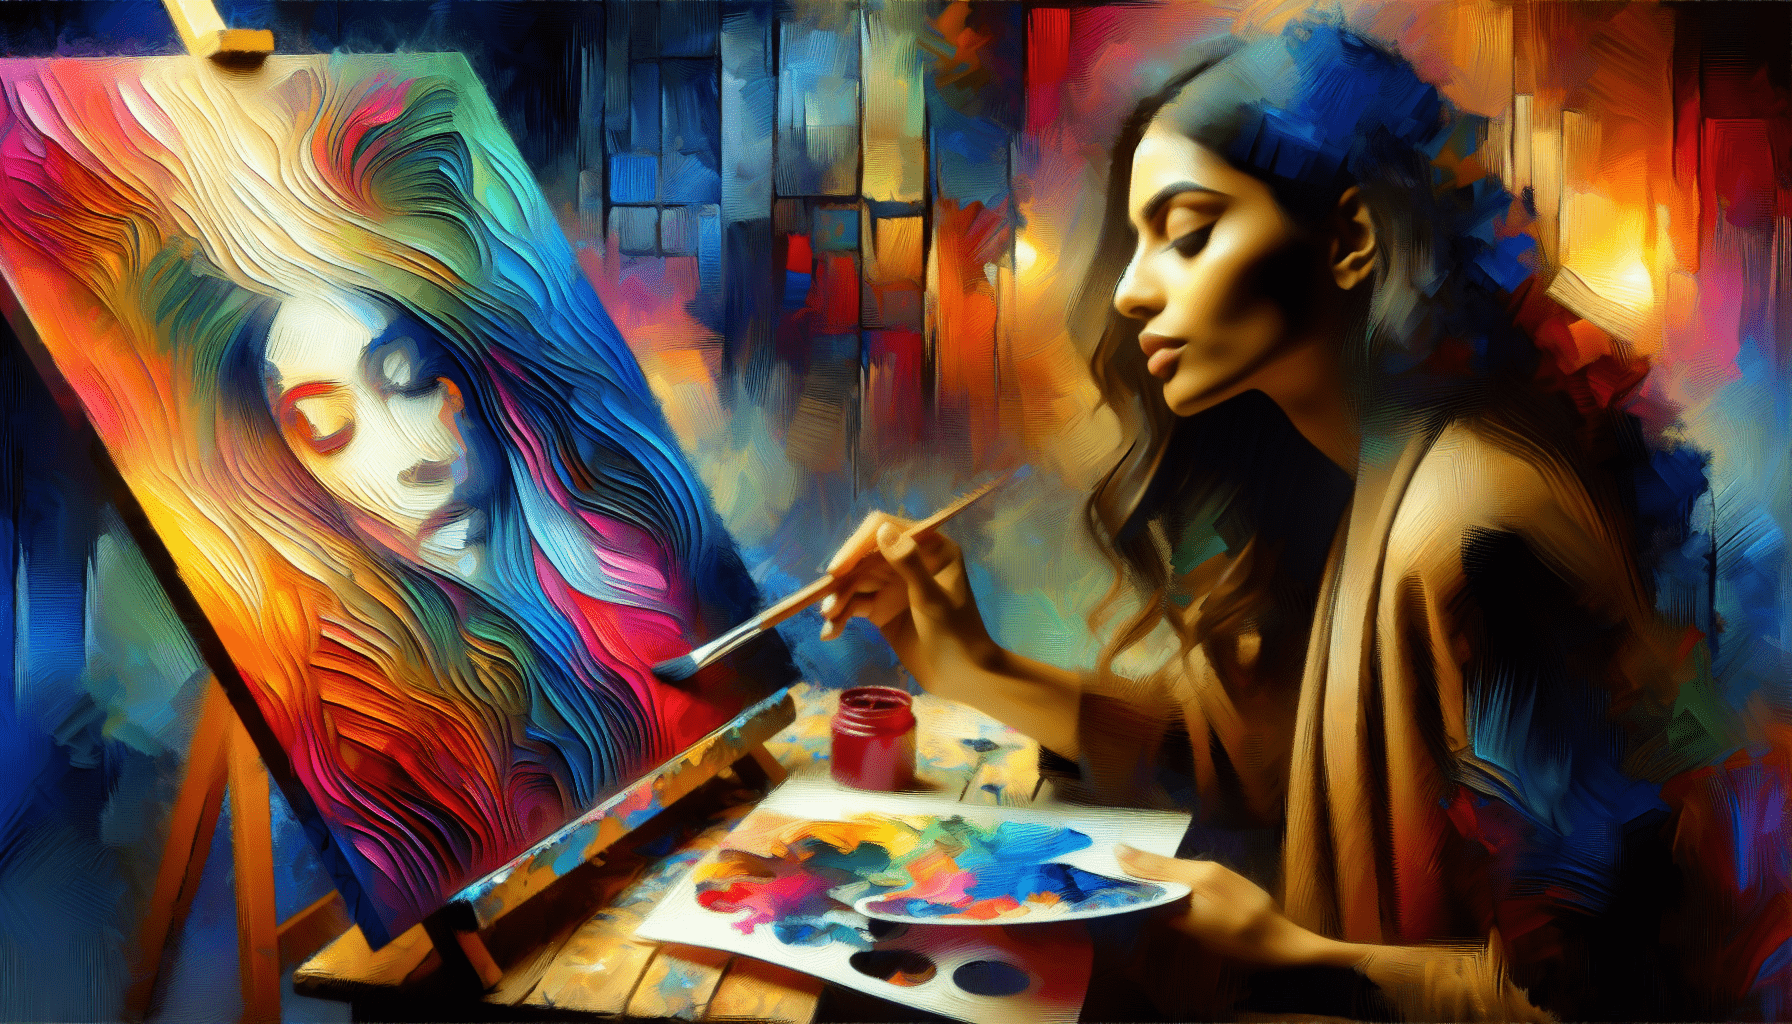 A digitally painted image of a woman painting a colorful portrait on canvas in an abstract, vibrant style.